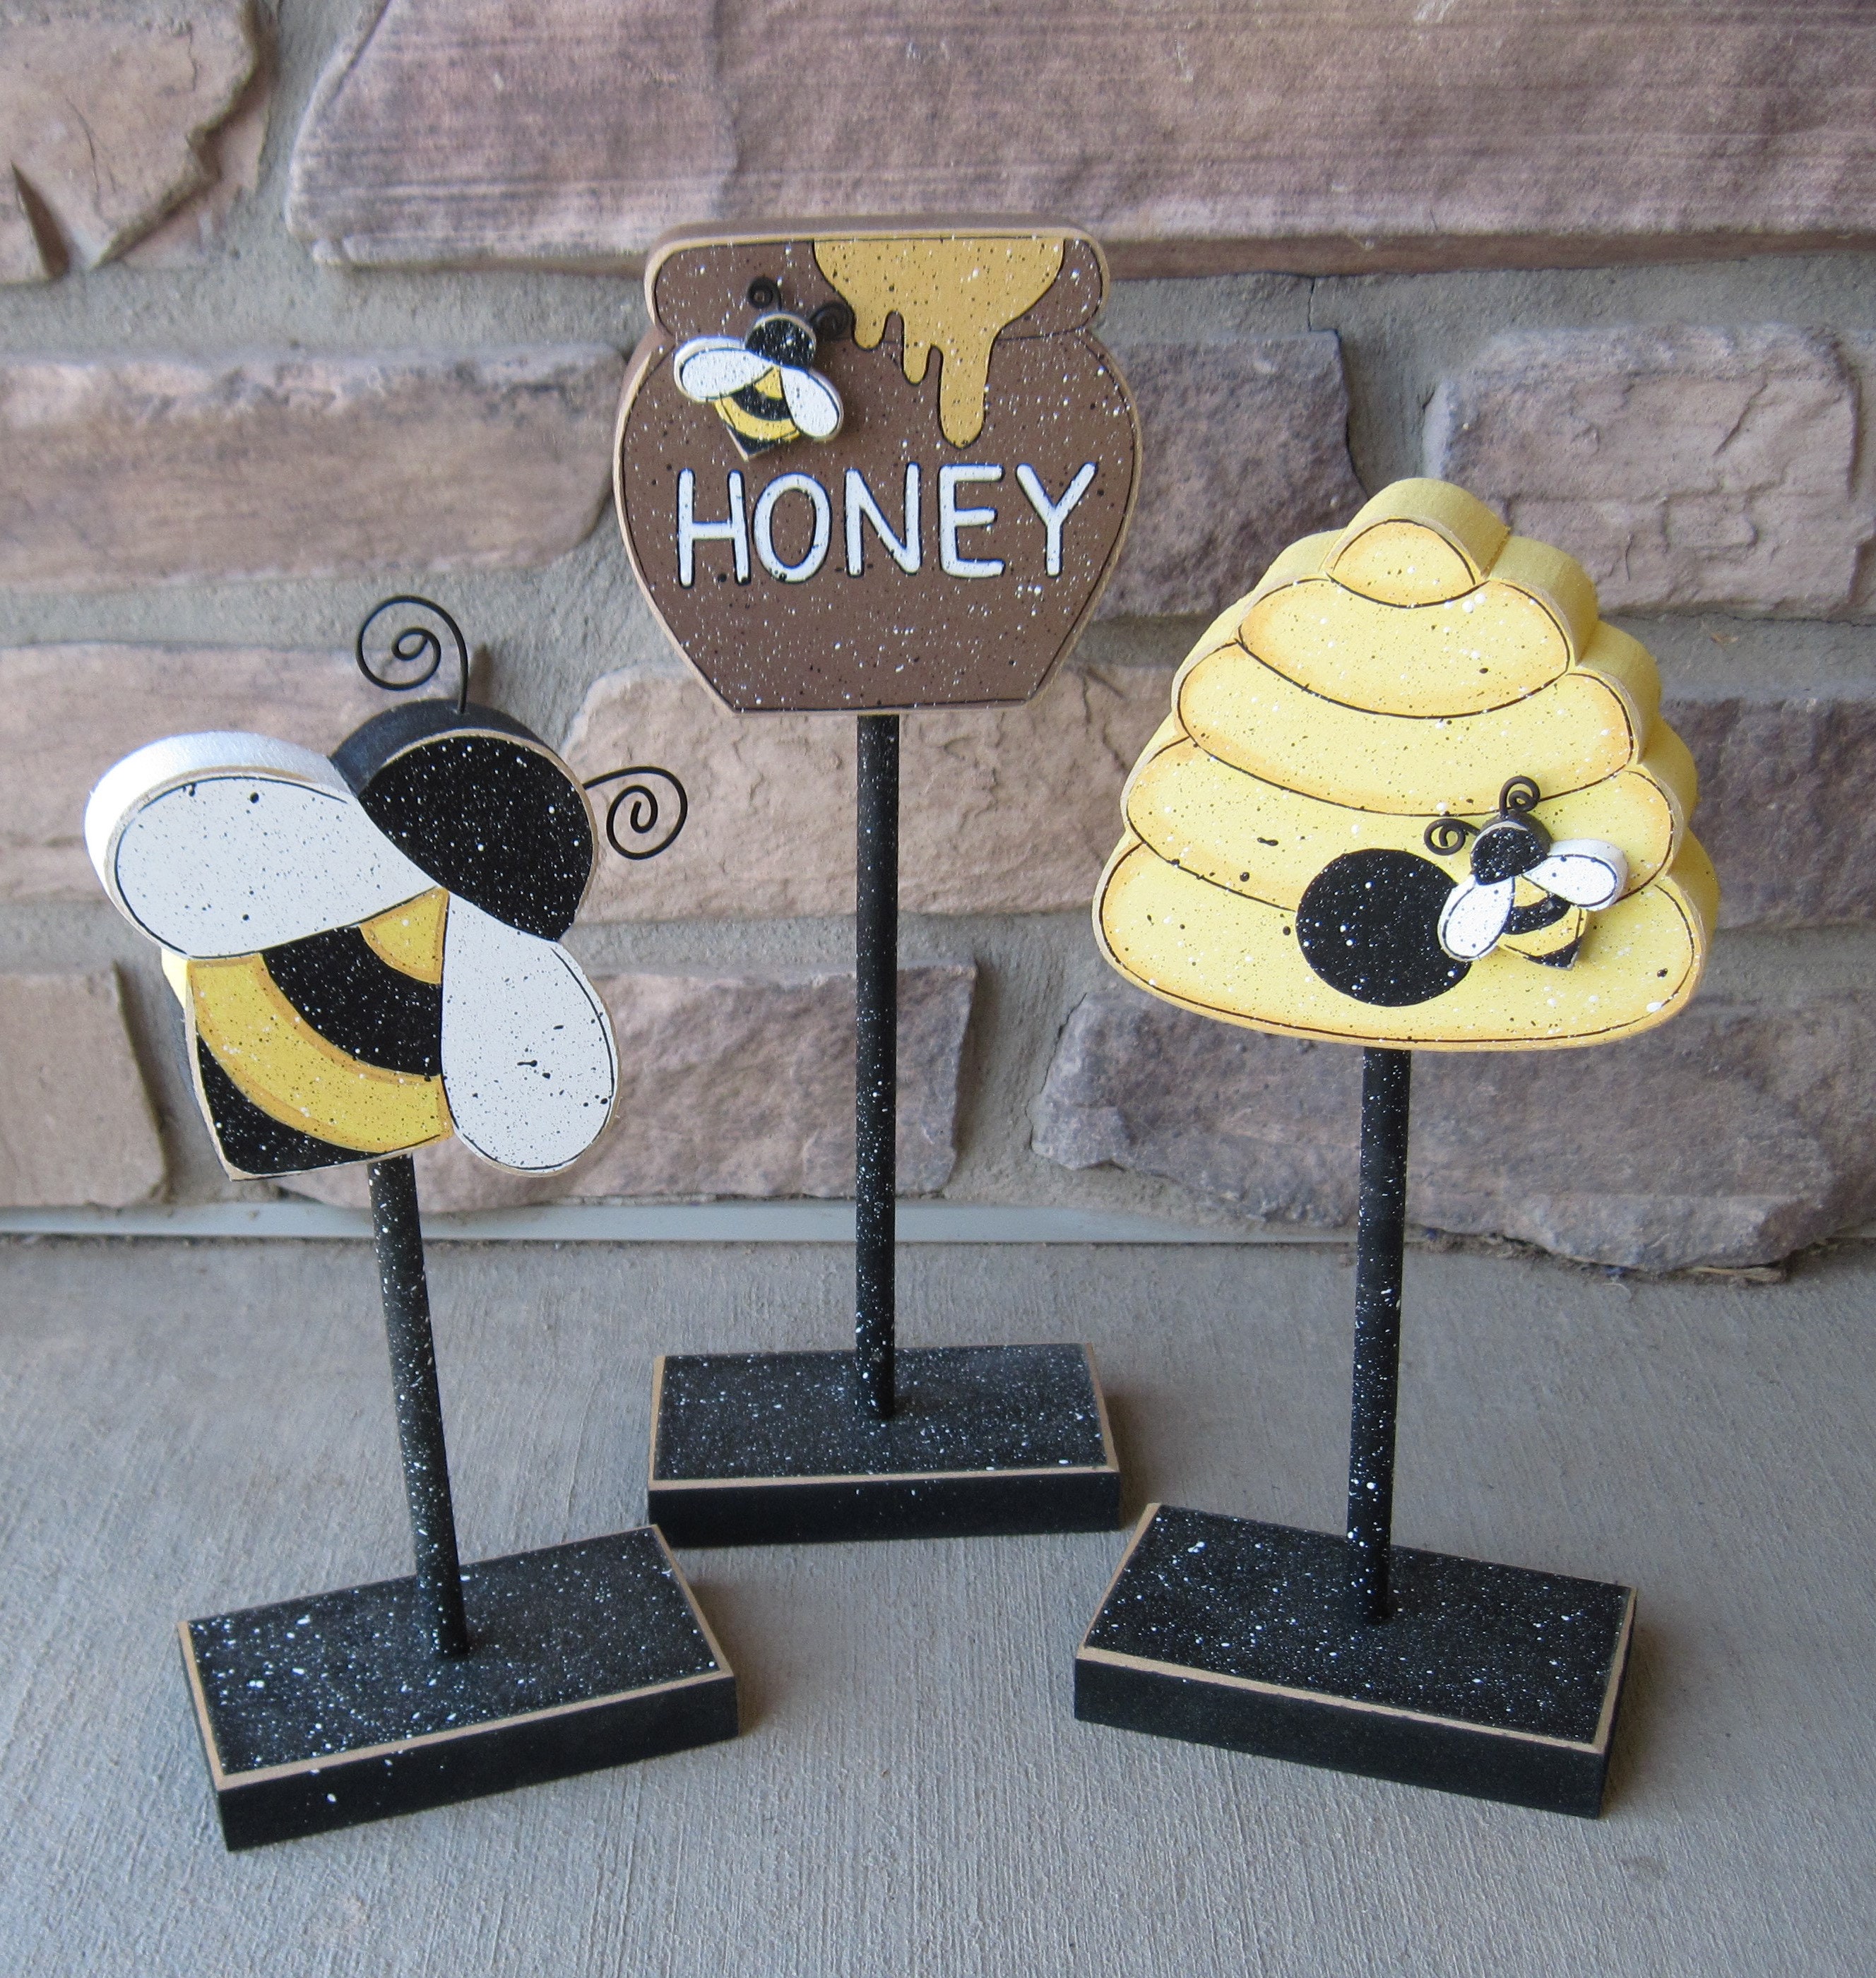 3 Tall Standing BEE THEMED Block SET With Honey Pot, Bee, and